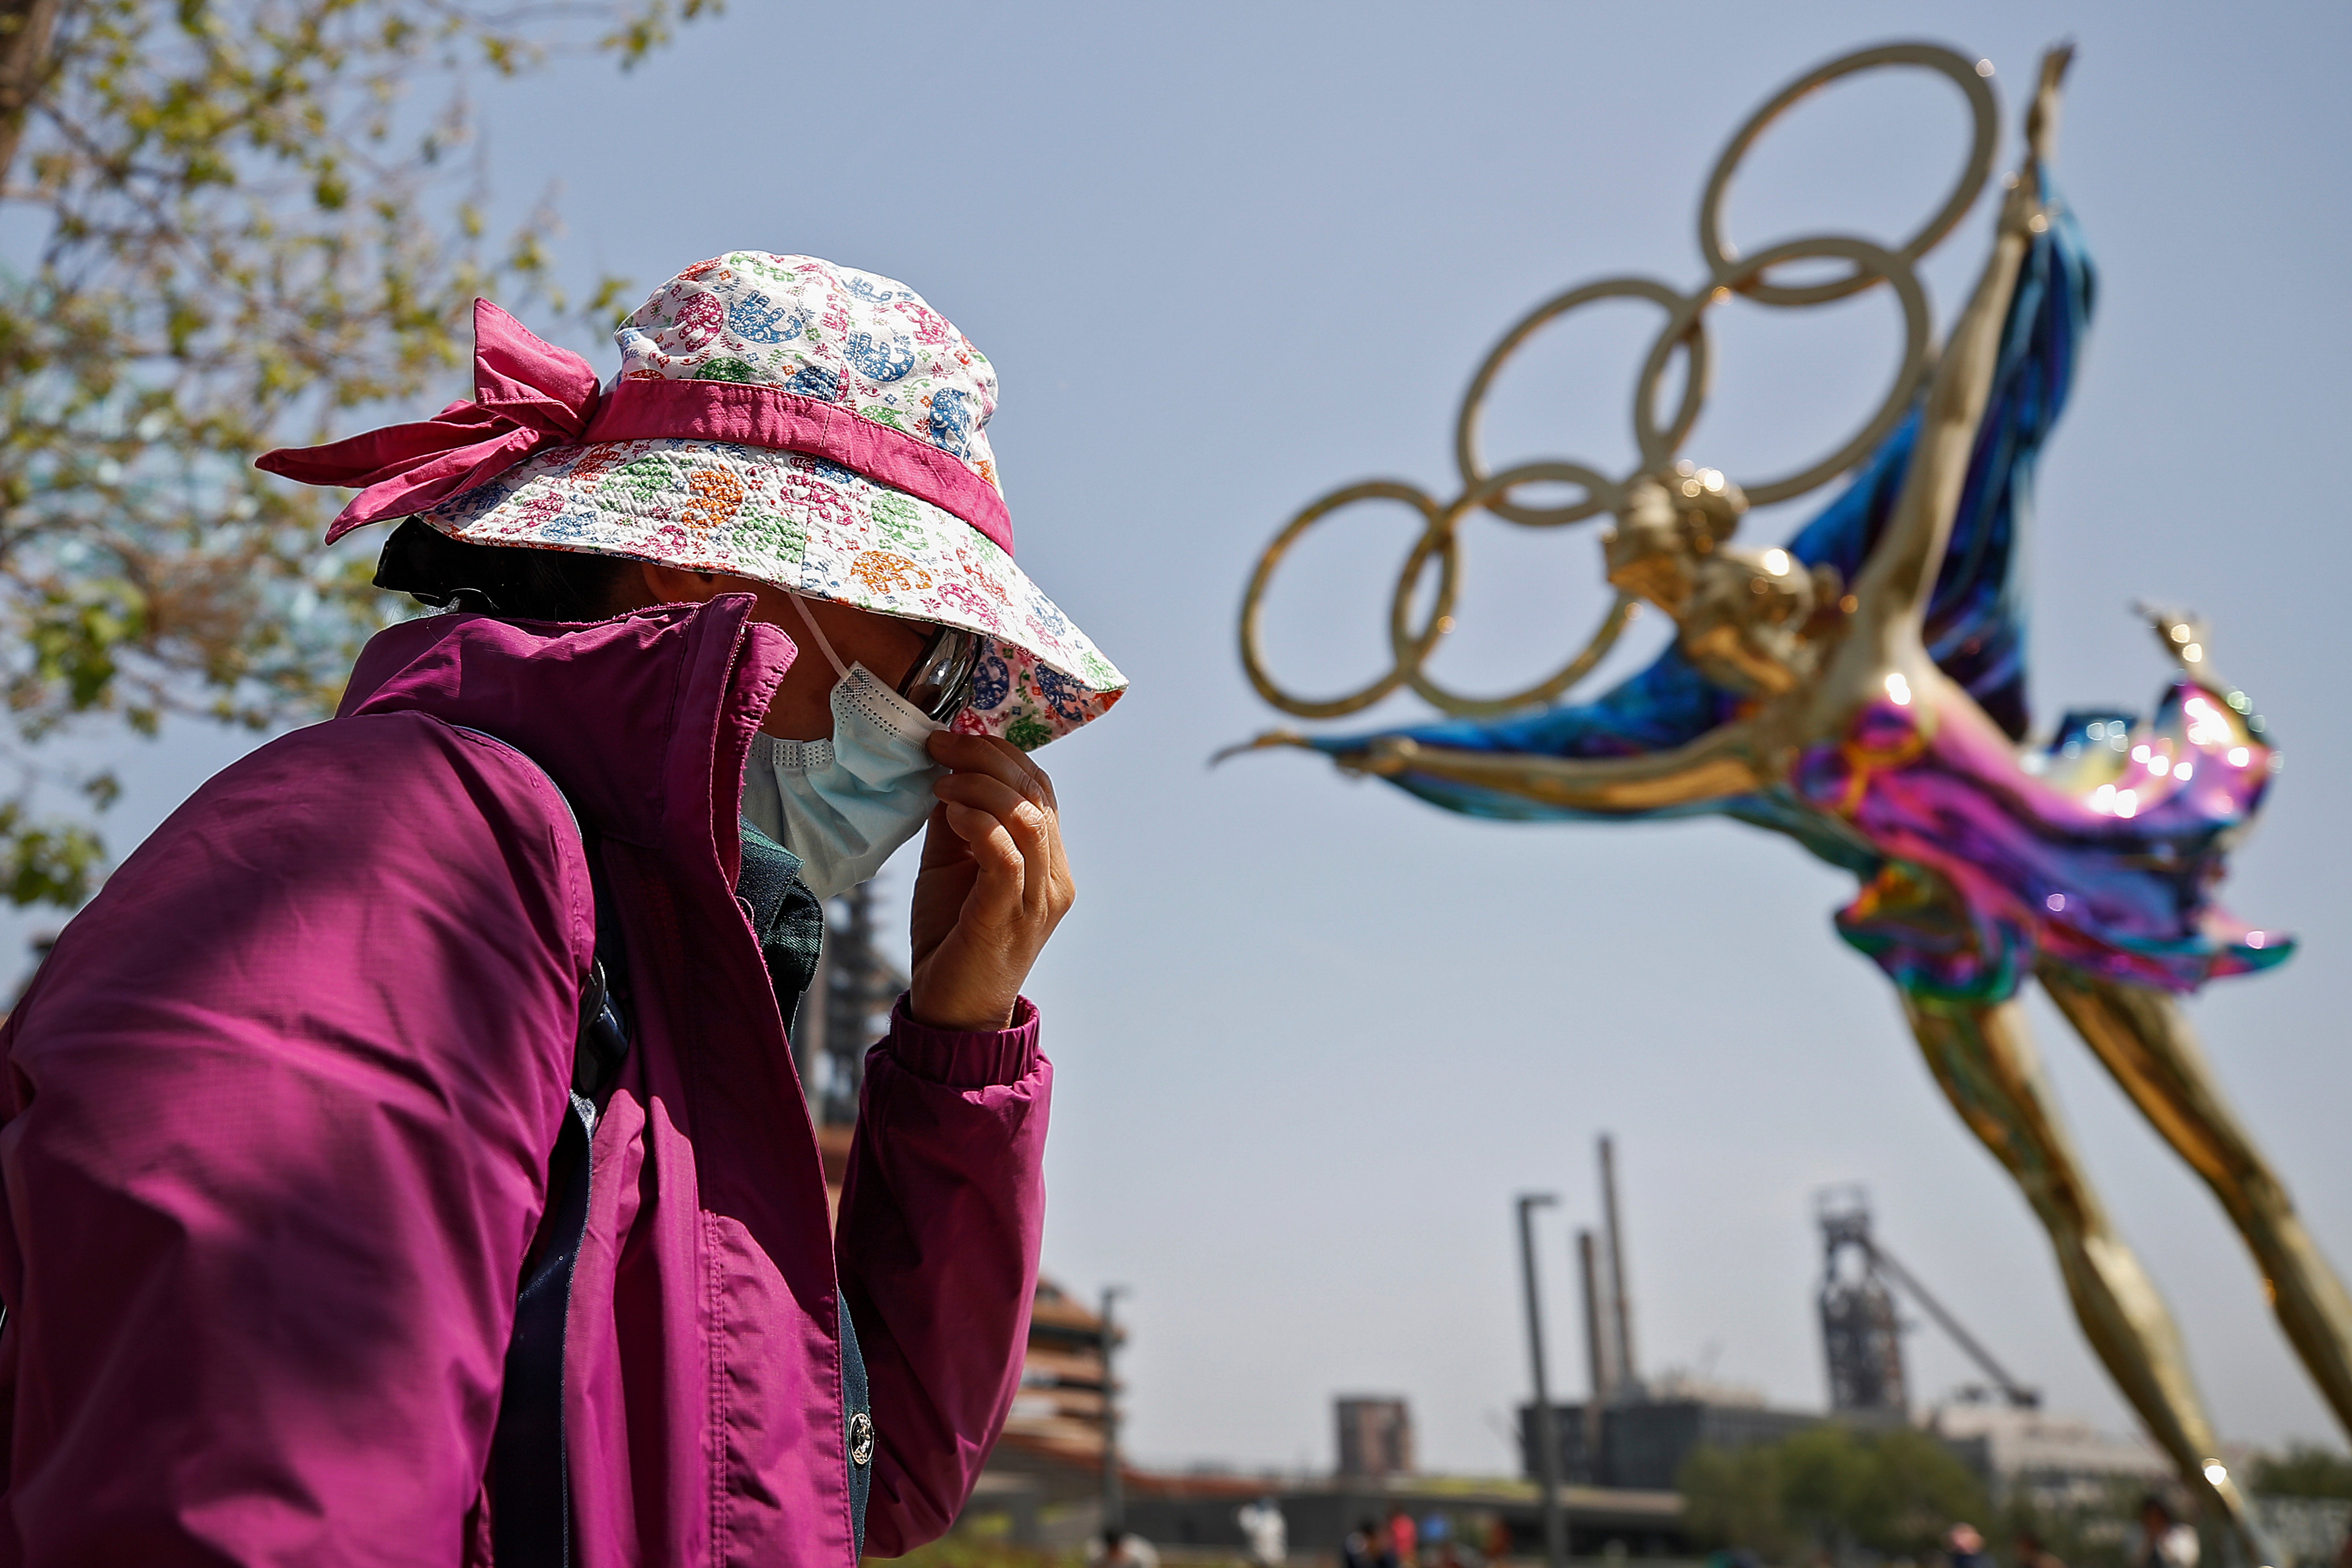 File: A woman adjusts her face mask as she walks by a statue featuring the Beijing Winter Olympics figure